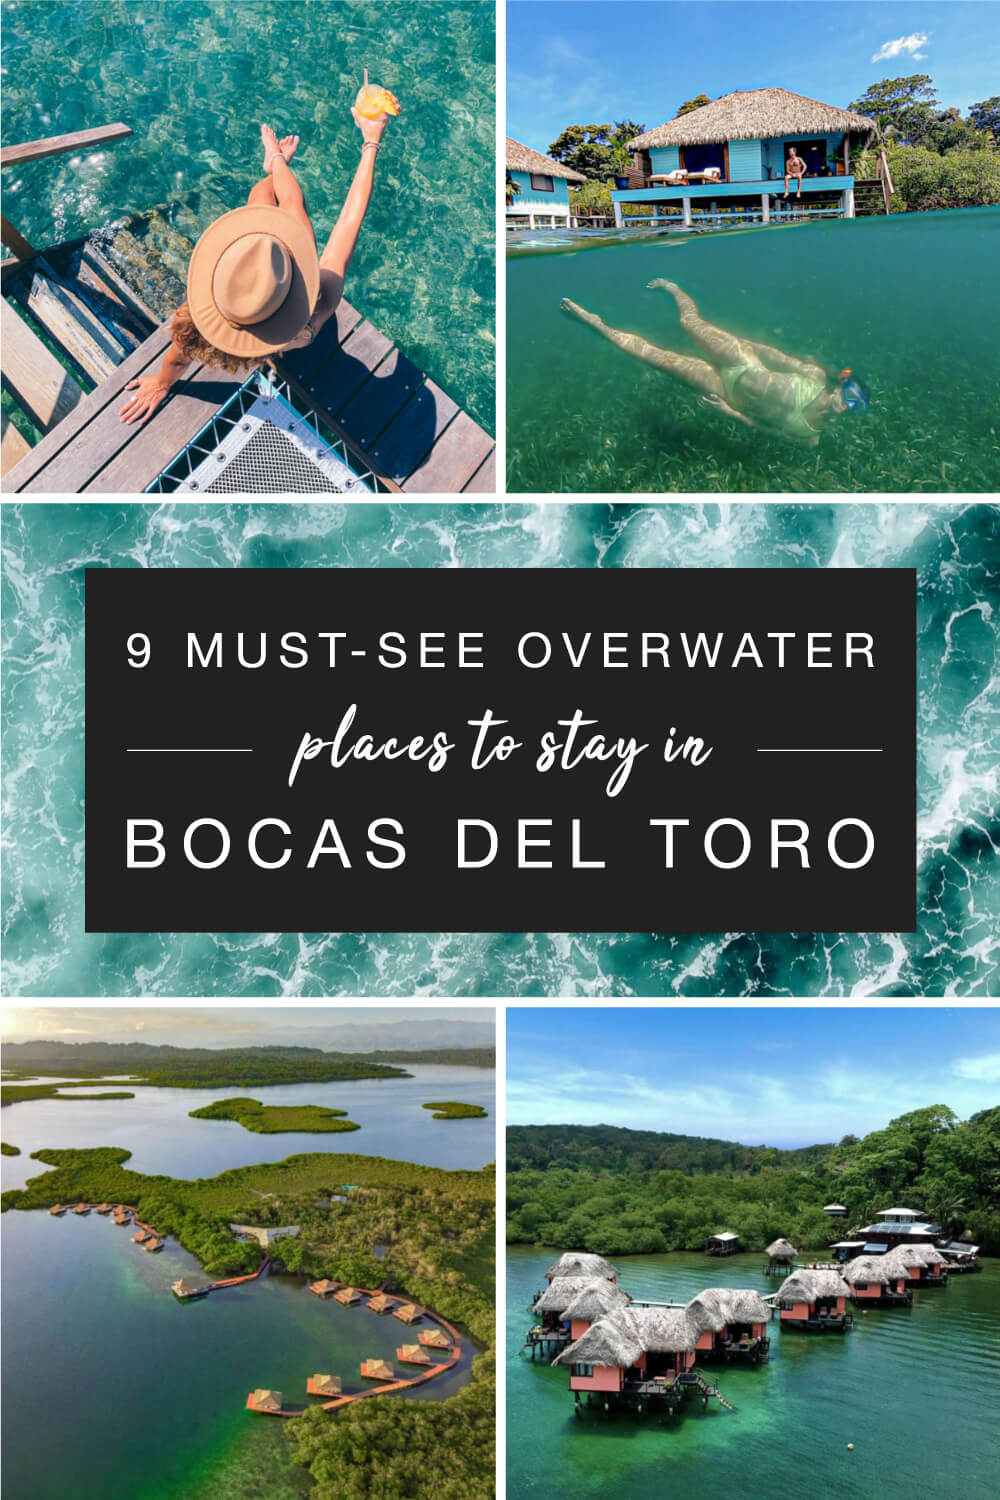 9 must see places to stay in Bocas del Toro Pinterest pin.